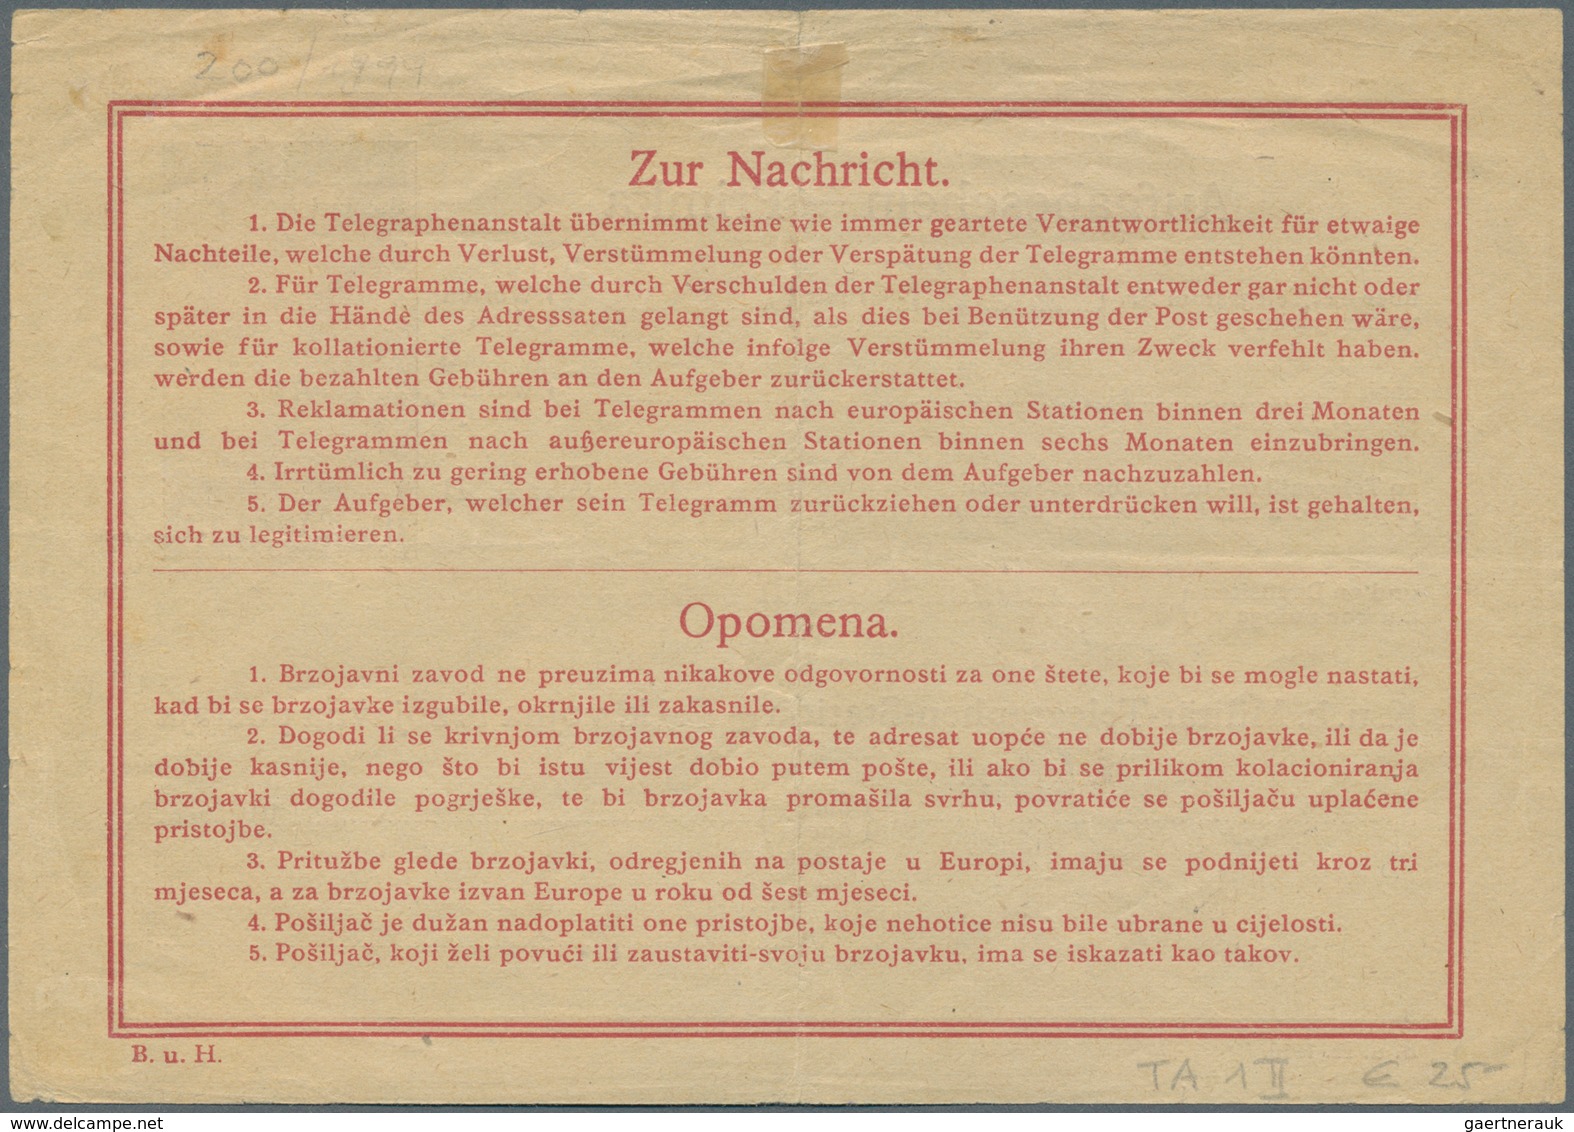 Jugoslawien - Ganzsachen: 1919/24 Two Used Receipts For Telegrams With Imprint "DRZAVA S.H.S./Bosna - Entiers Postaux